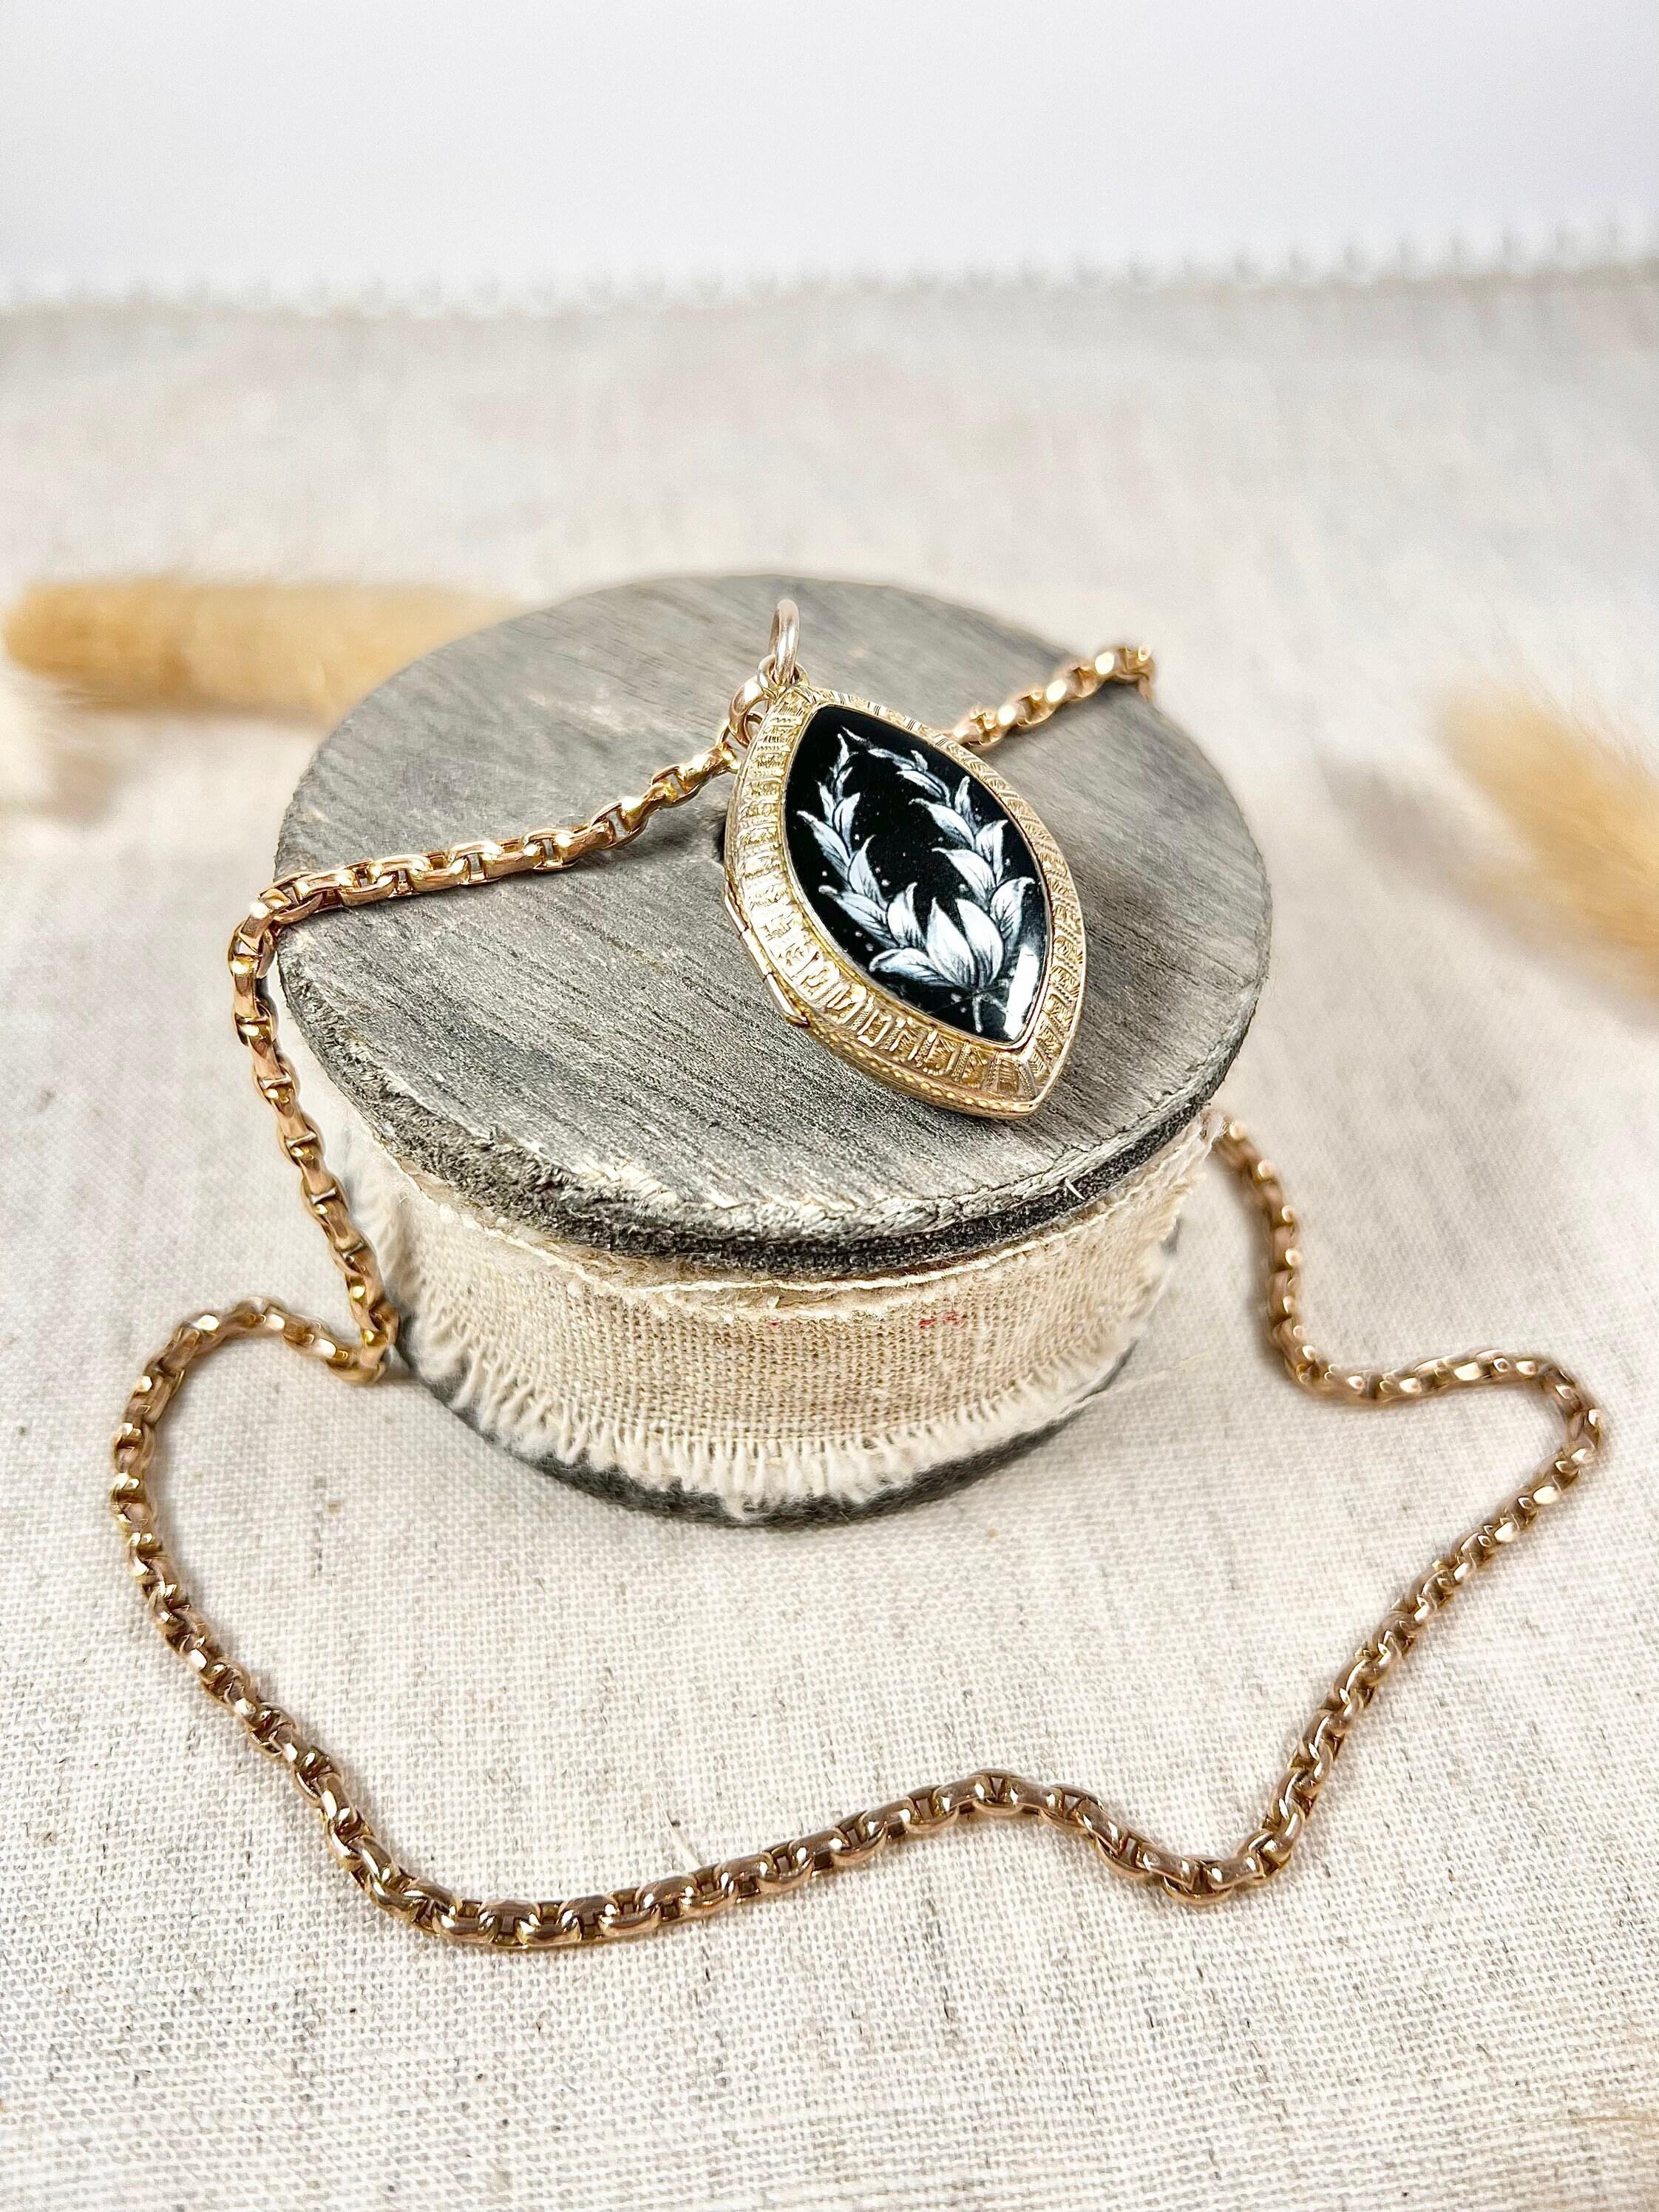 Antique Marquise Locket 

9ct Rose Gold Tested

Circa 1870

Fabulous, Victorian gold locket. A lovely, rare marquise shape. Beautifully decorated with a black enamel surface & white handed painted  flowers. The back is hand carved with gorgeous